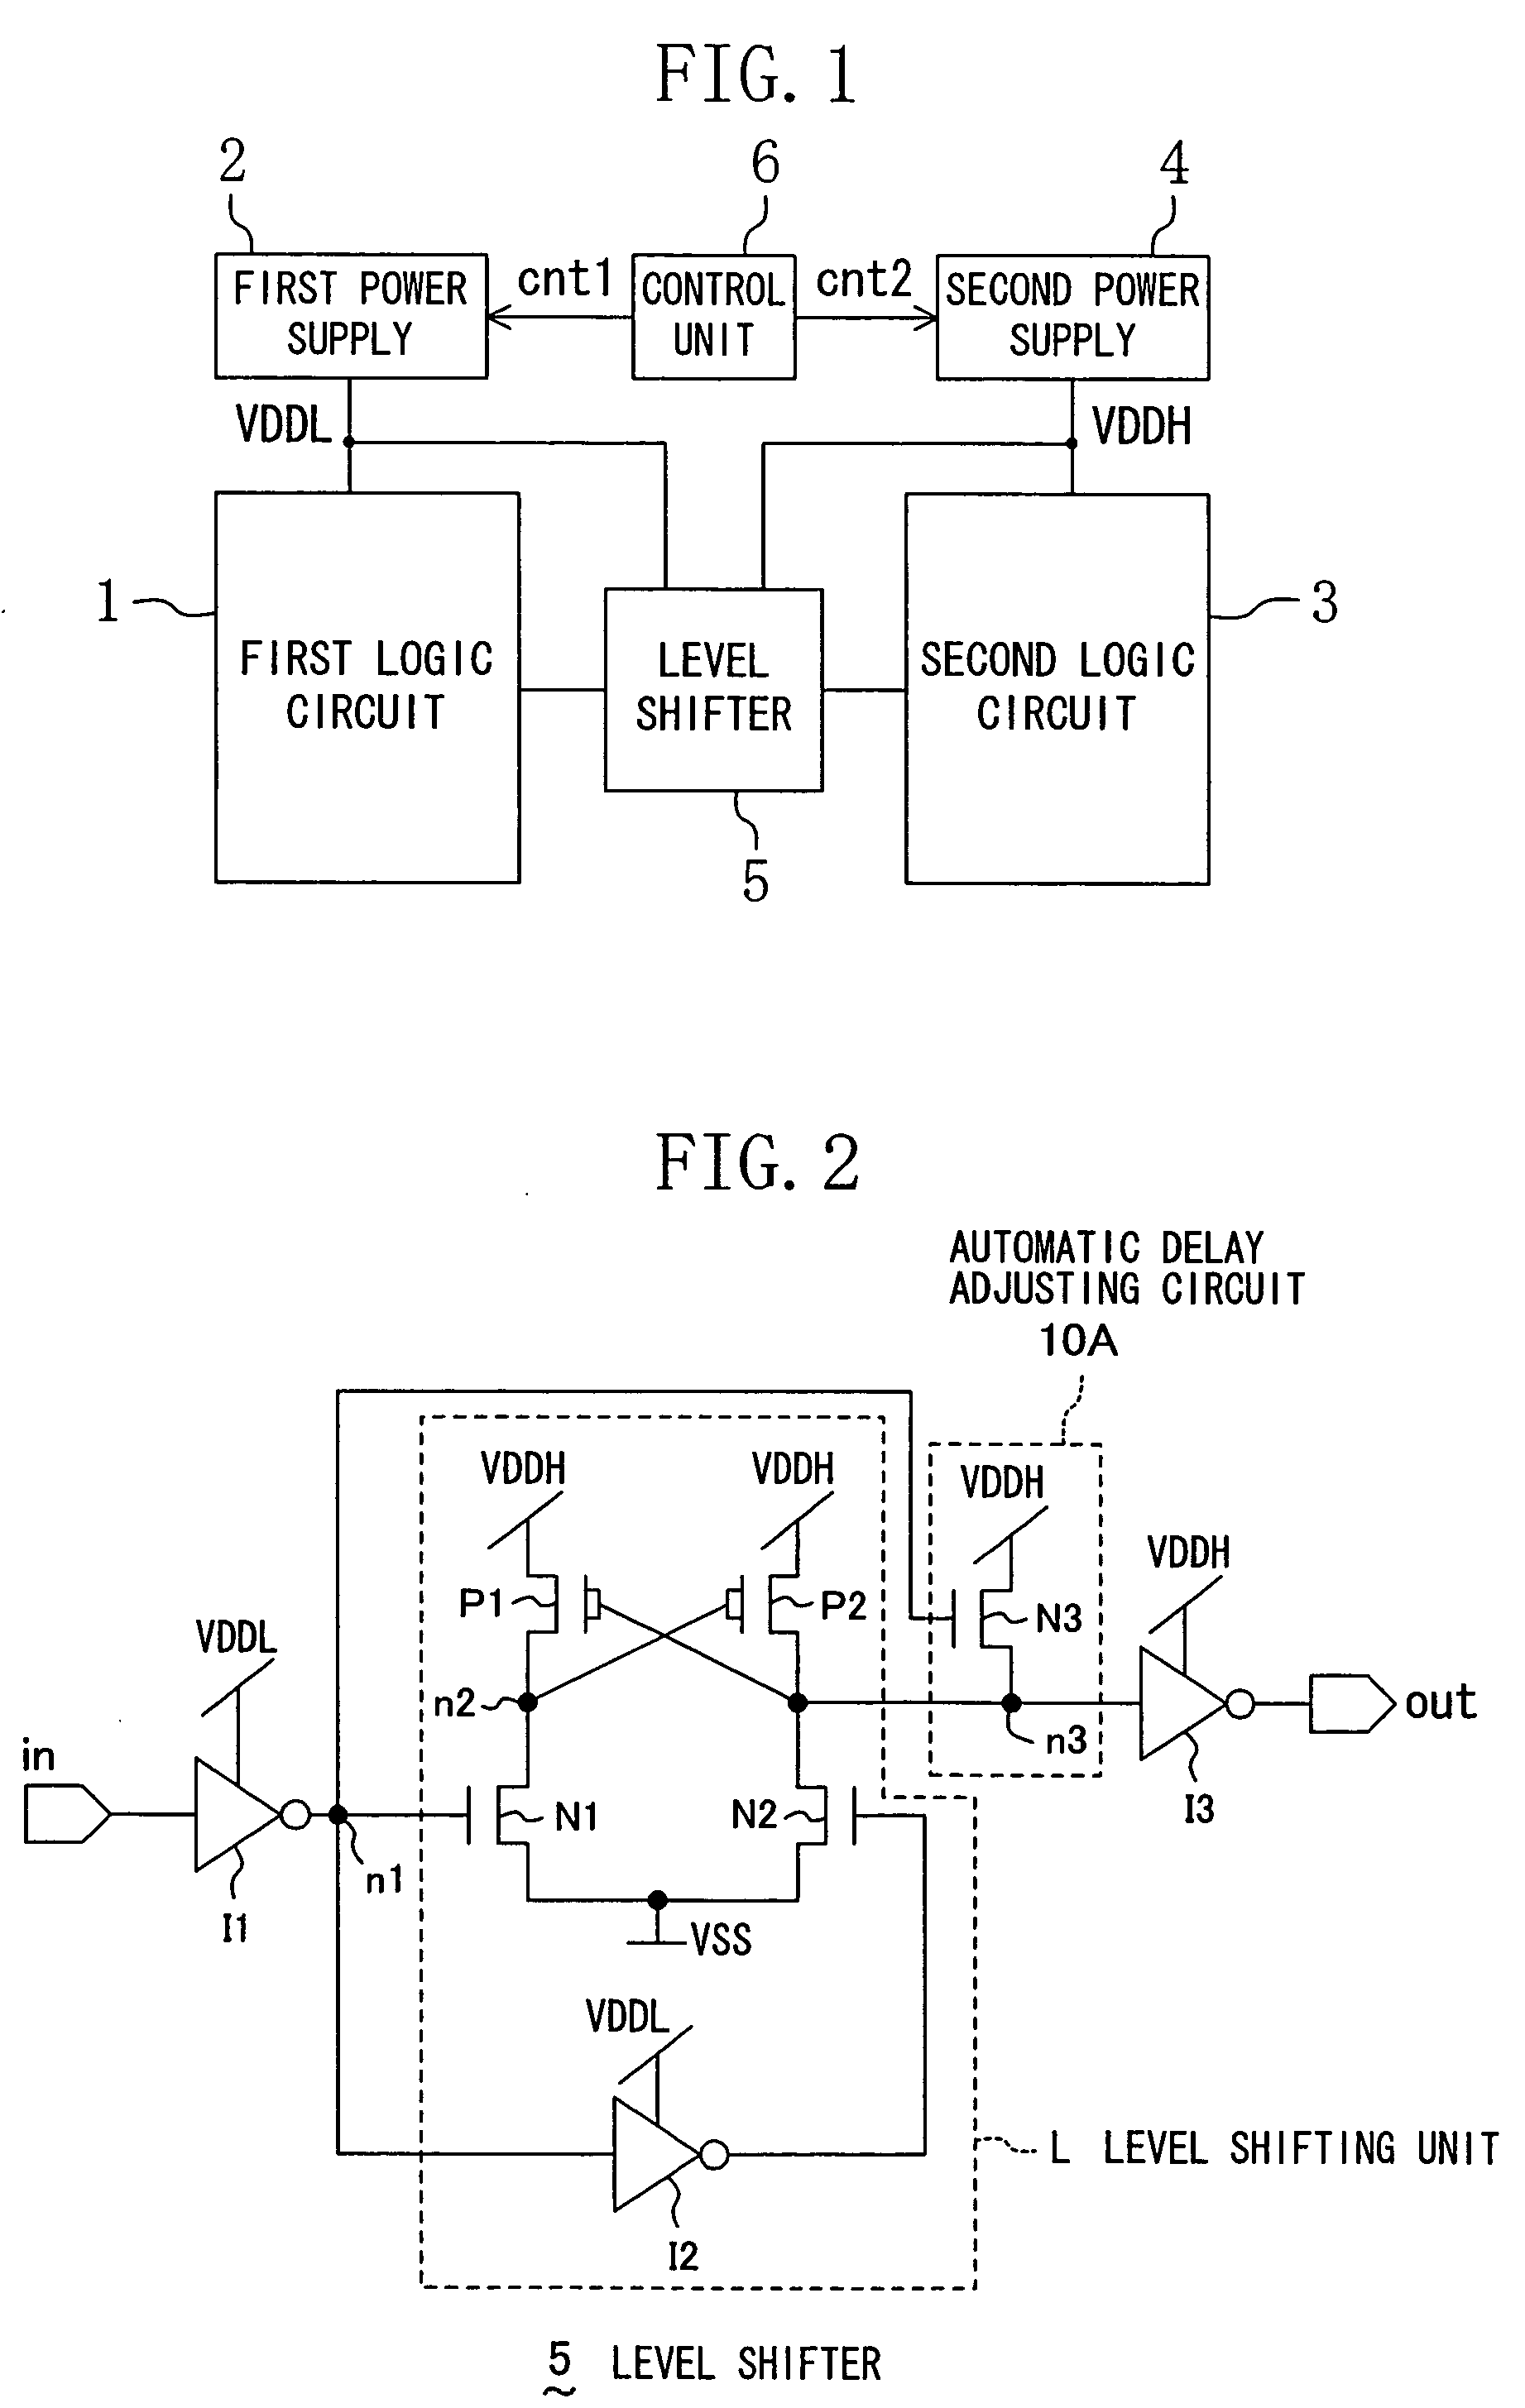 Level shifter having automatic delay adjusting function